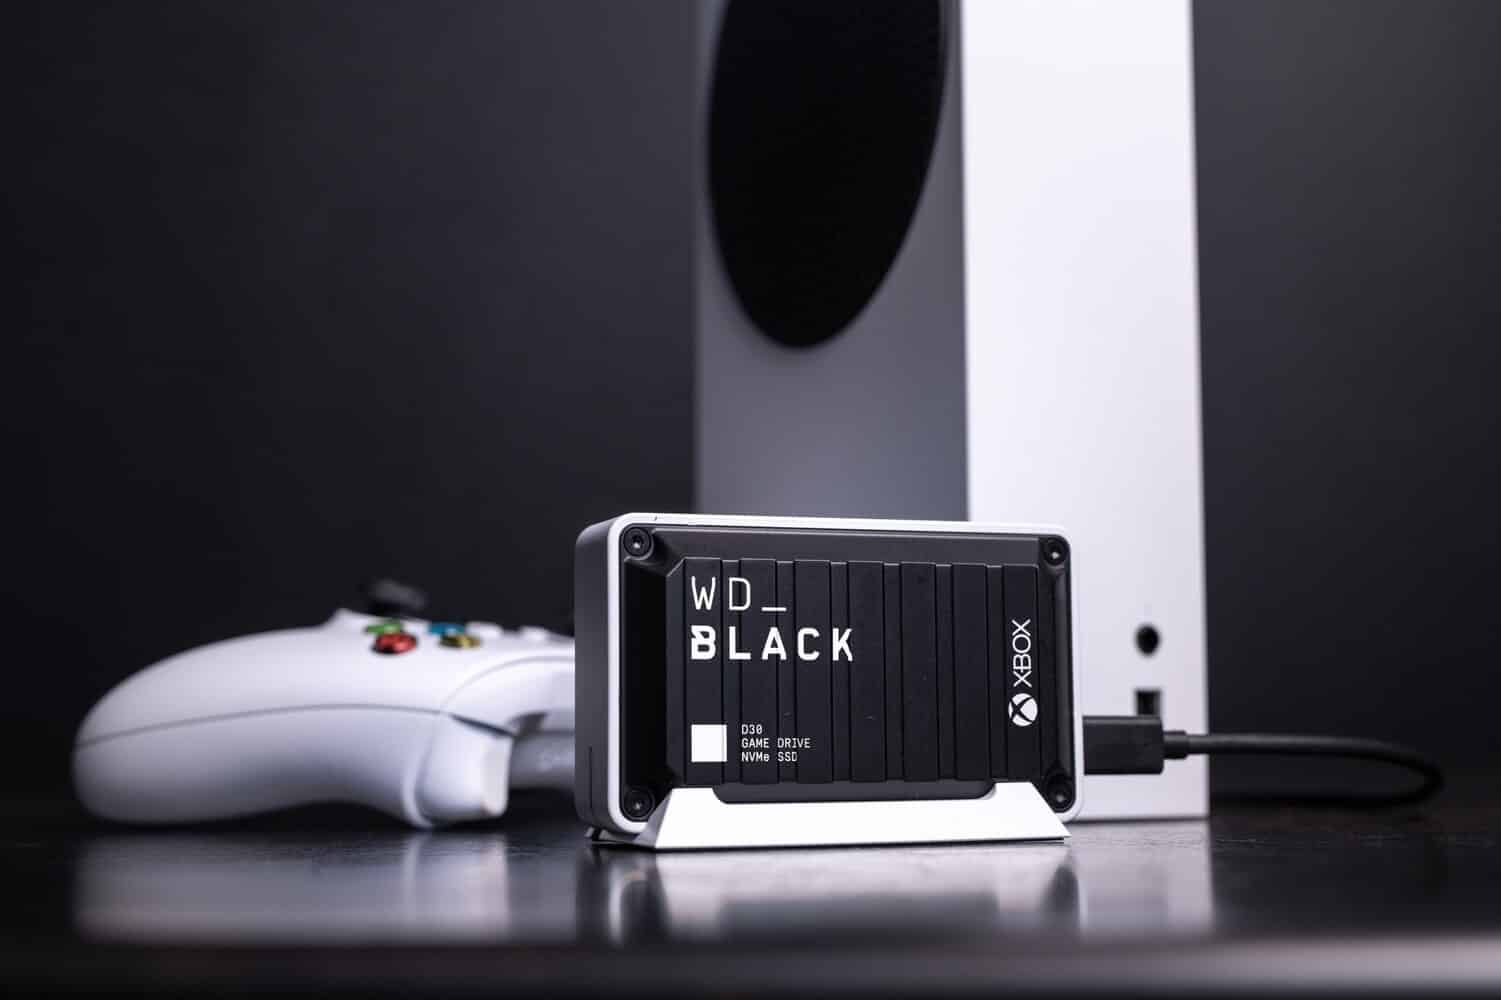 WD_BLACK D30 Game Drive SSD for Xbox 